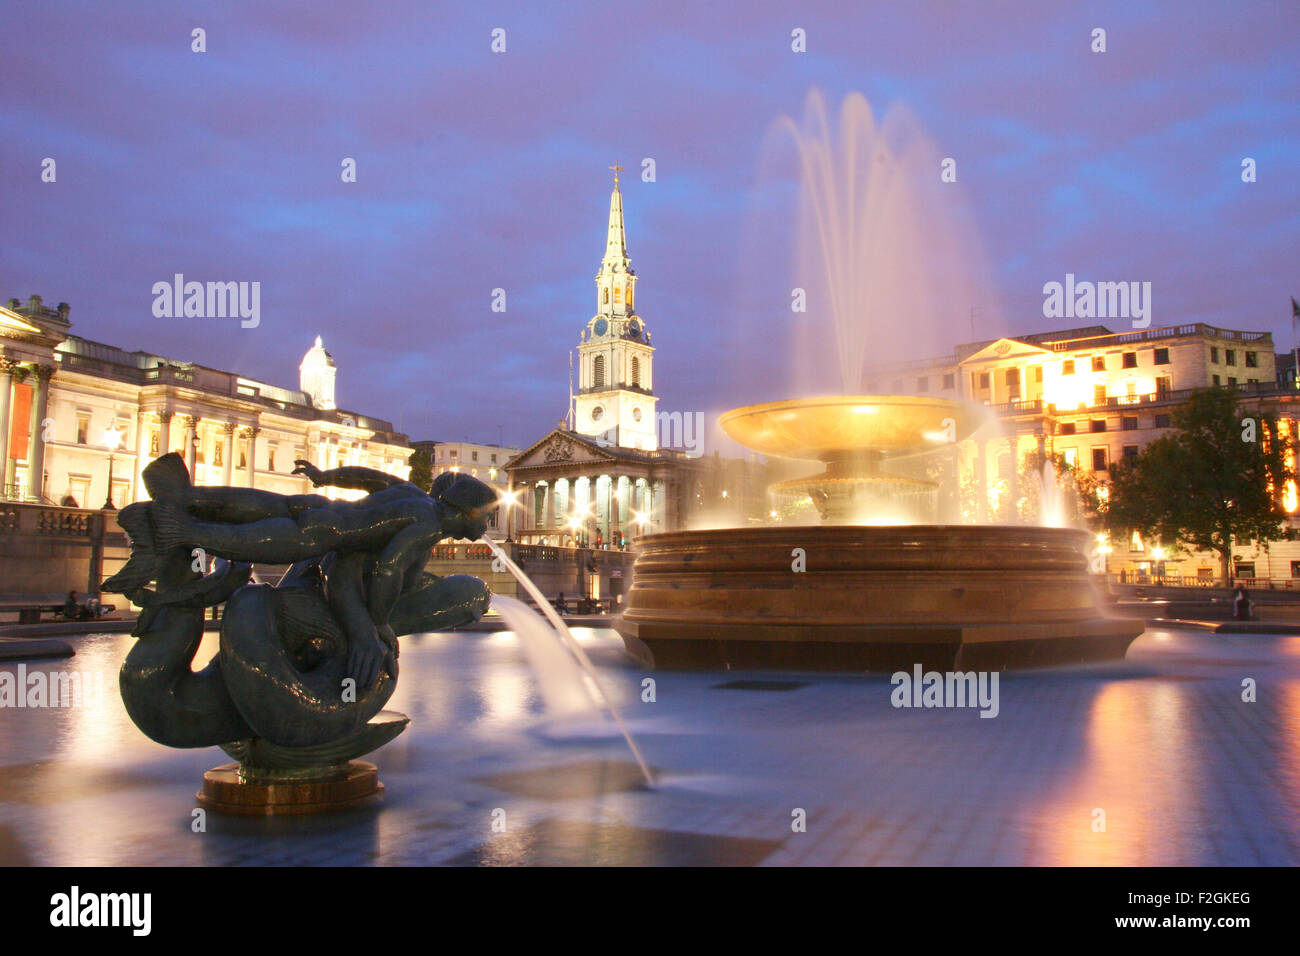 A view of Trafalgar square and the National Portrait Gallery at dusk Stock Photo